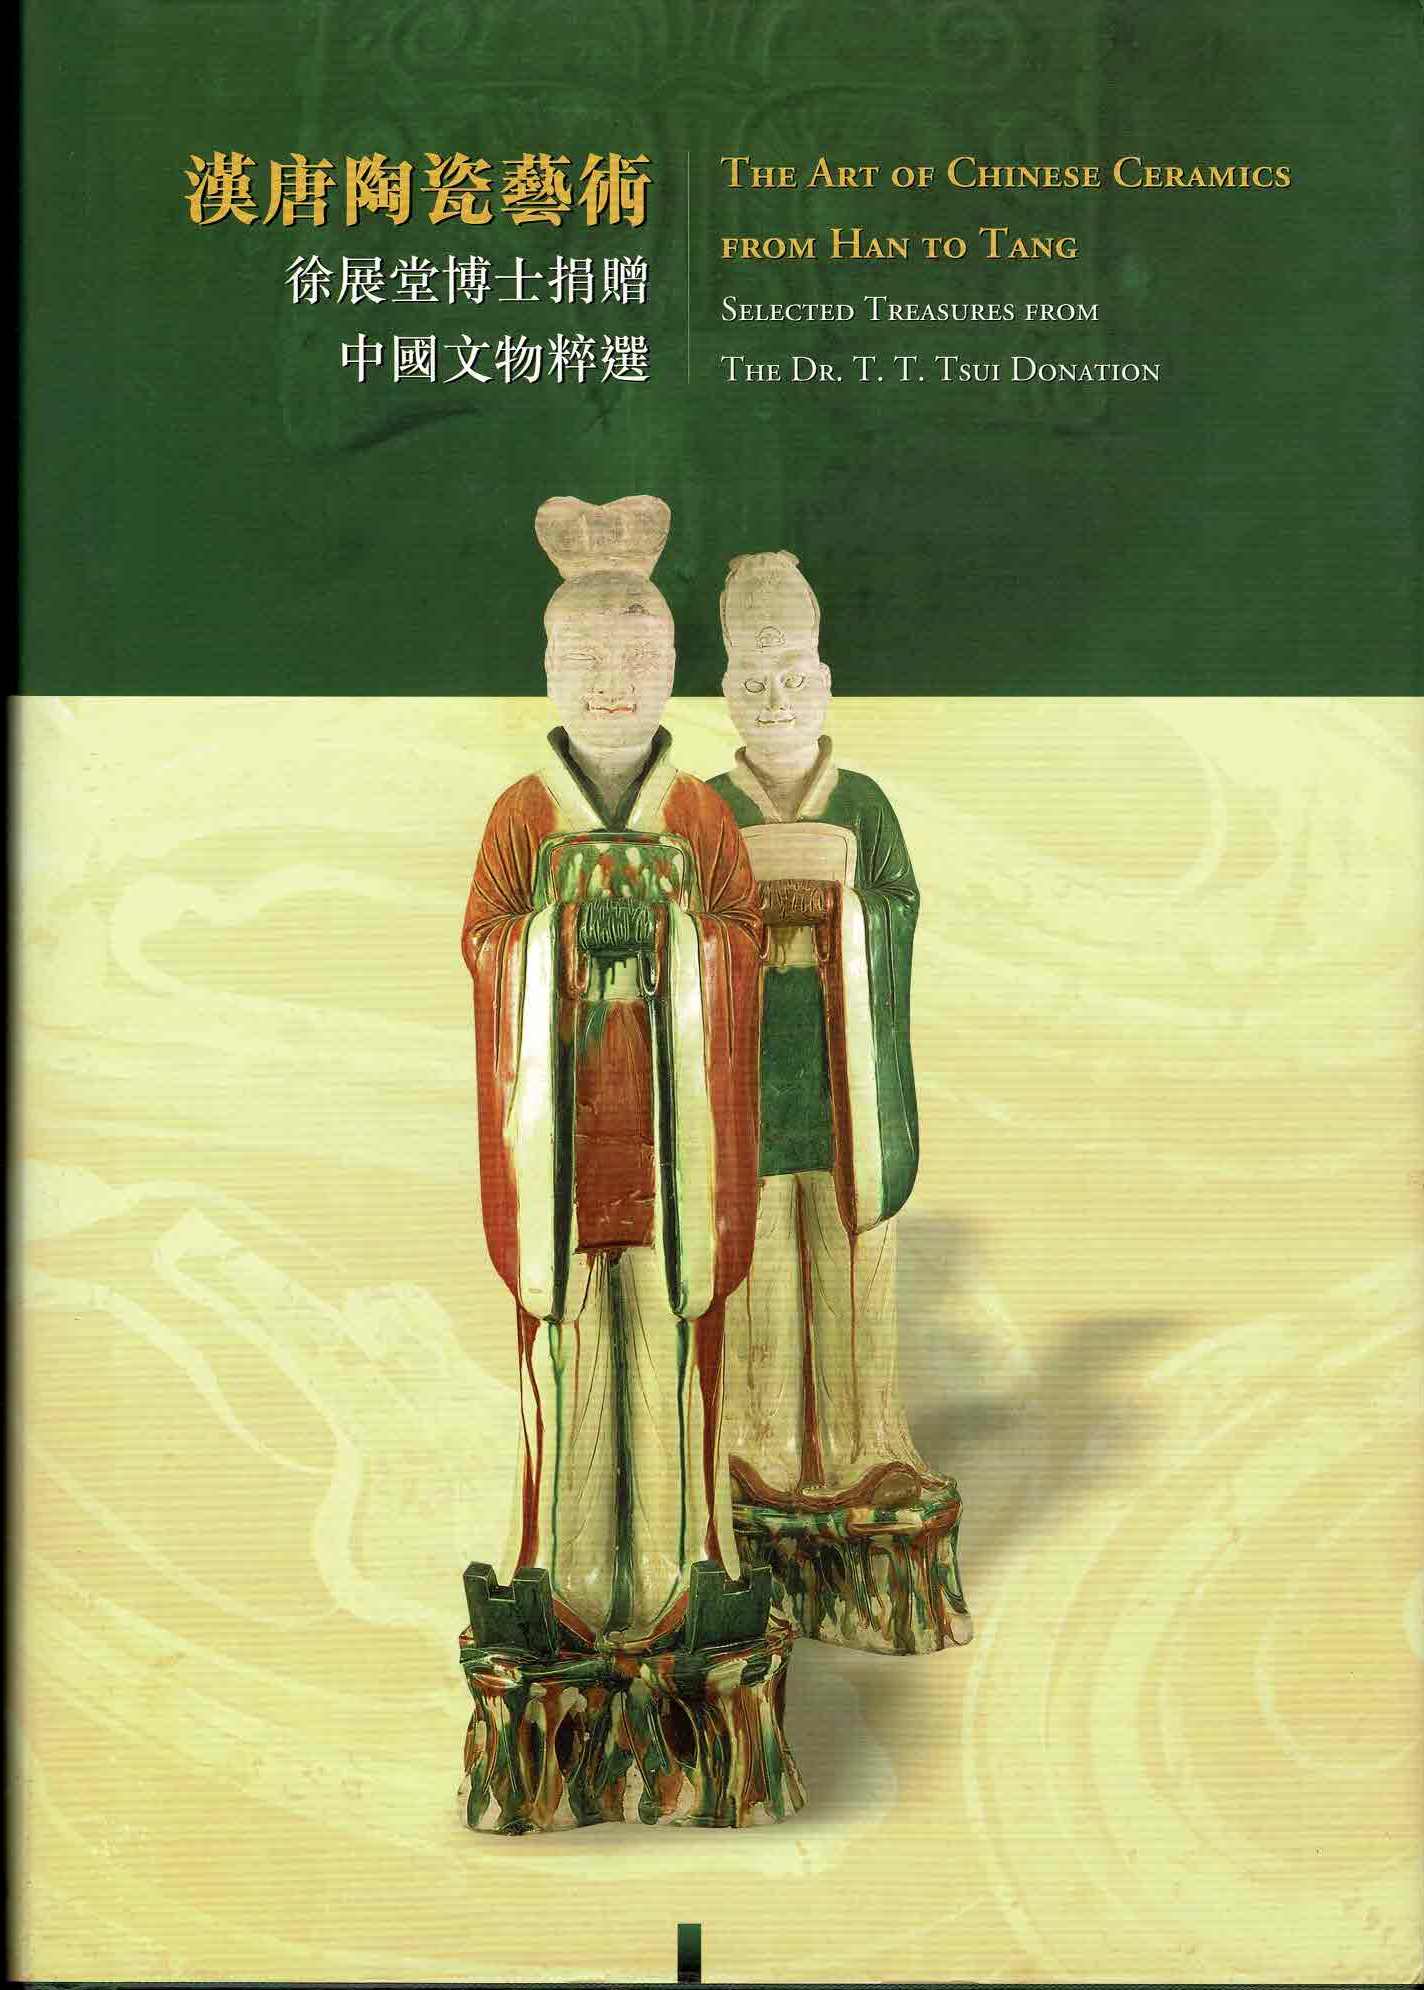 Yim, Shui-yuen et al. - The Art of Chinese Ceramics from Han to Tang. Selected Treasures from the Dr. T.T. Tsui Donation